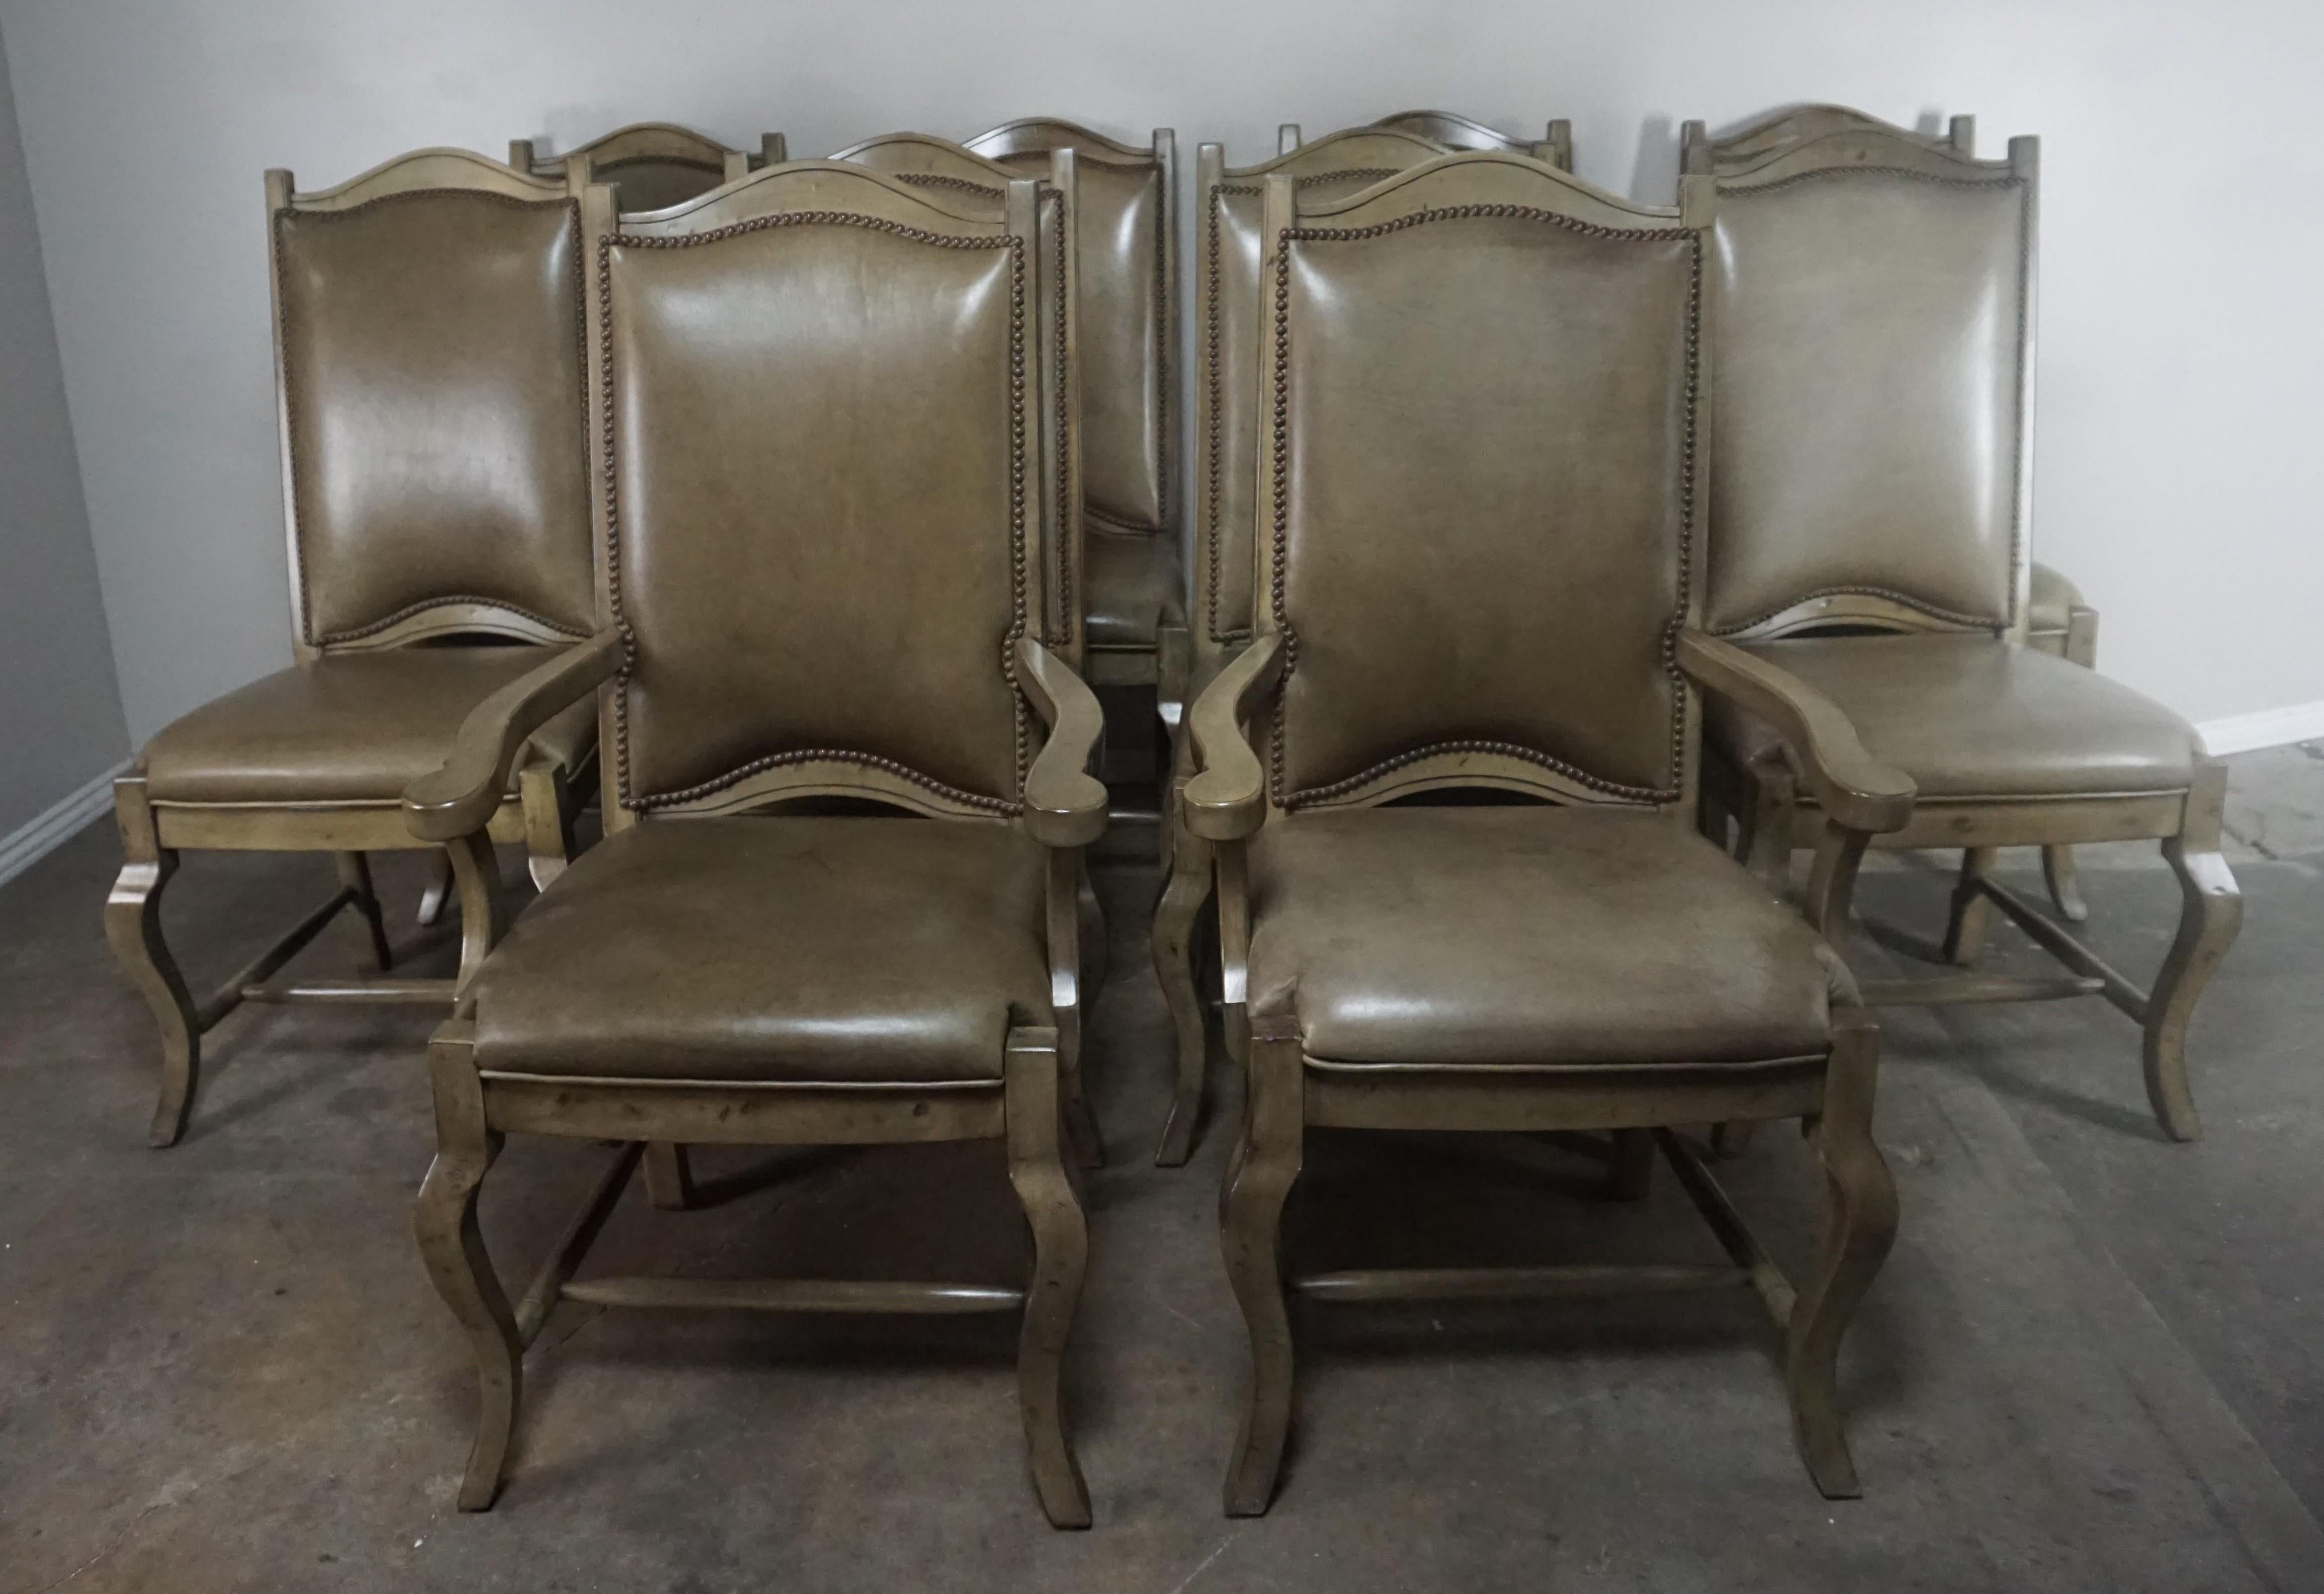 Set of ten Country French style leather upholstered ladder back dining chairs. Upholstered in a soft taupe colored cow hide with nailhead trim detail.
Measures: Armchairs 25 x 25 x 46
Side chairs 23.5 x 25 x 46
Seat height 20.5 on all.
 